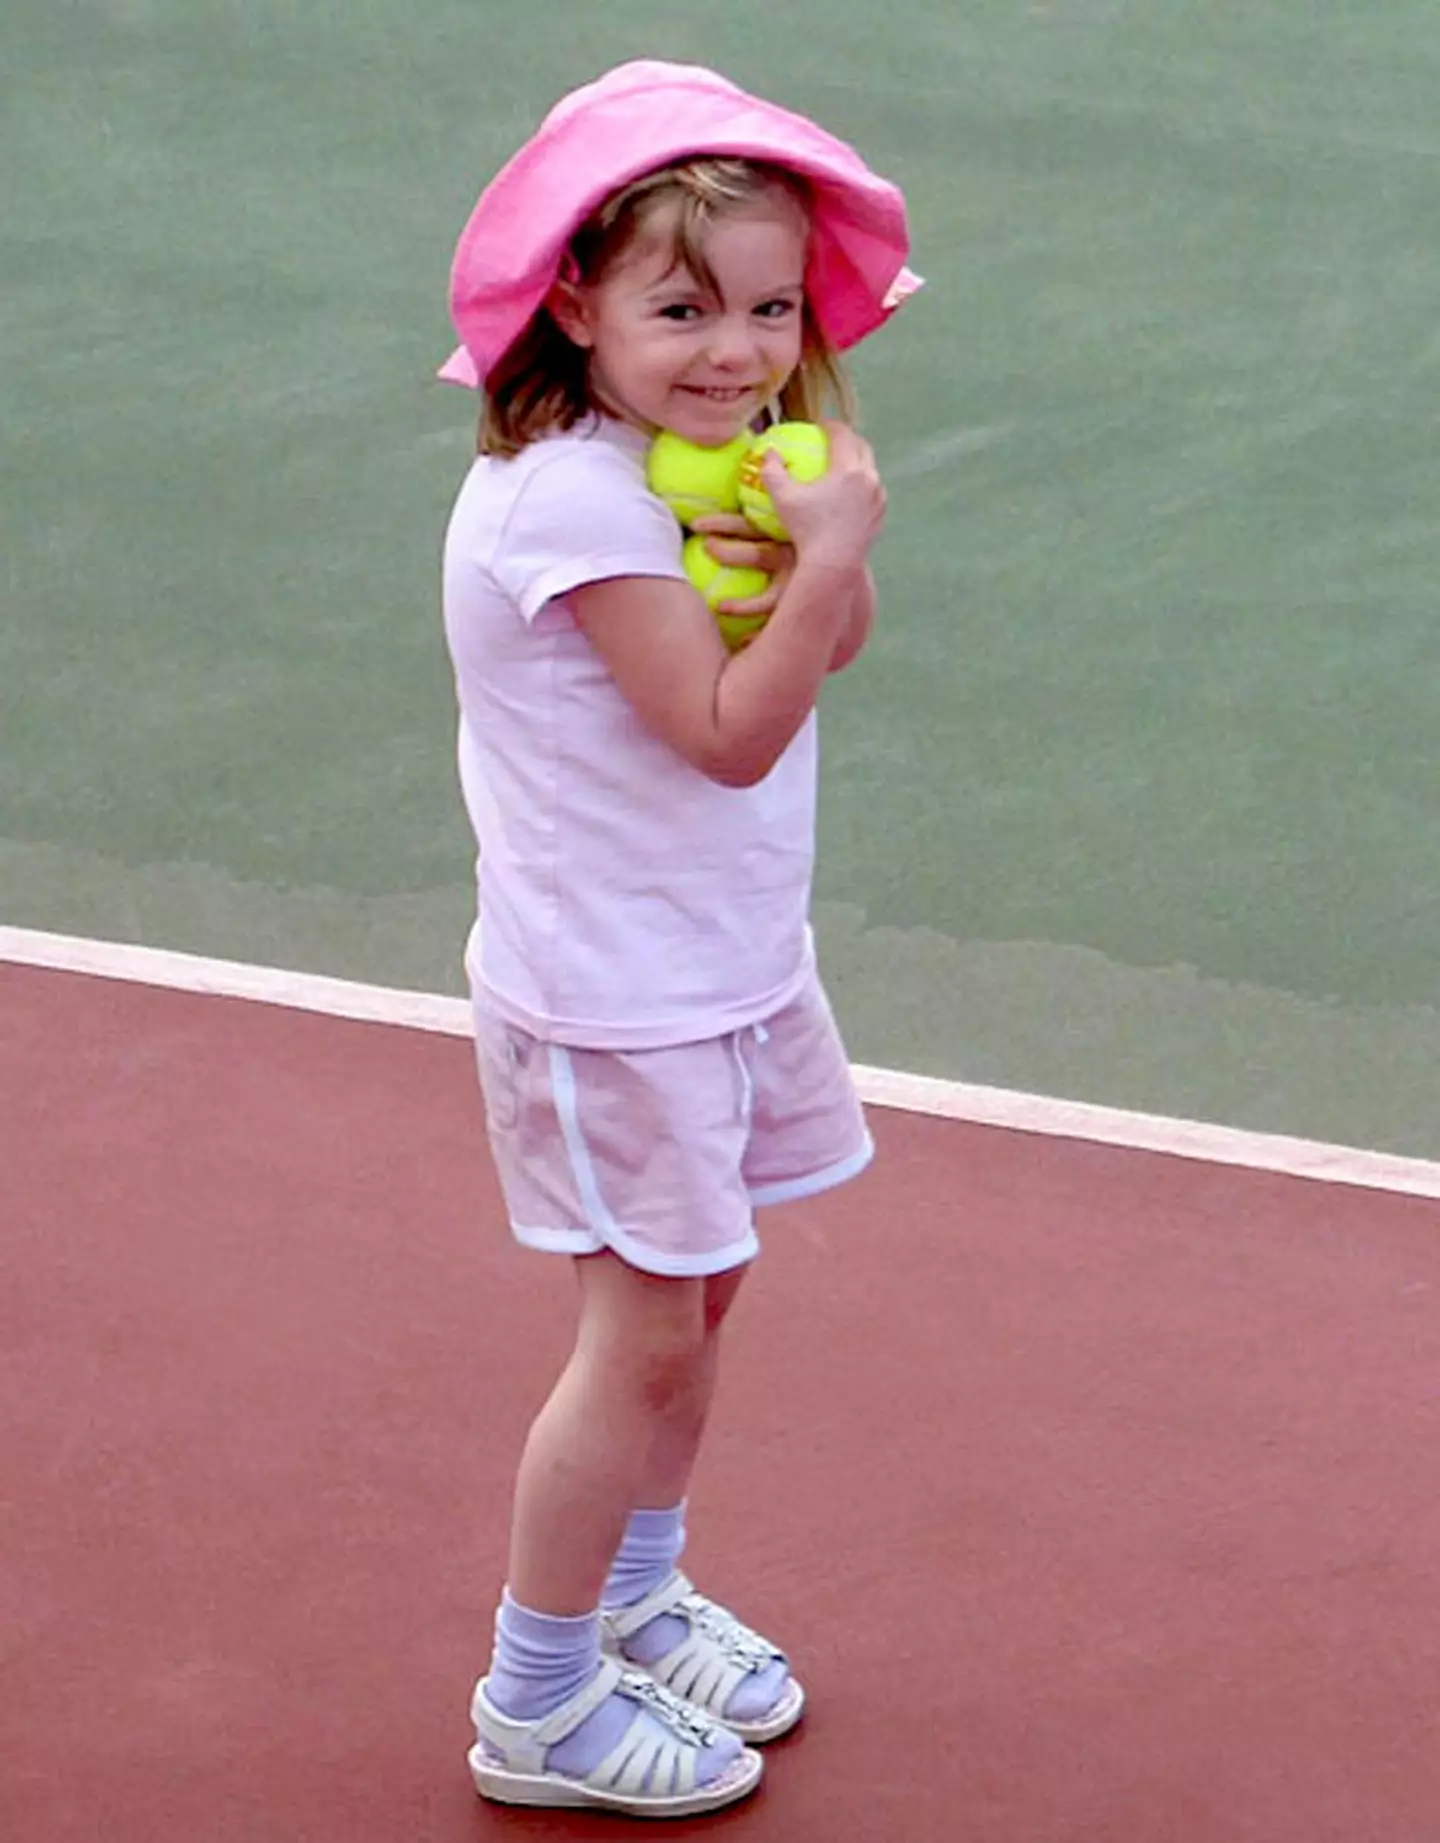 Madeleine McCann disappeared from her family's villa in 2007.